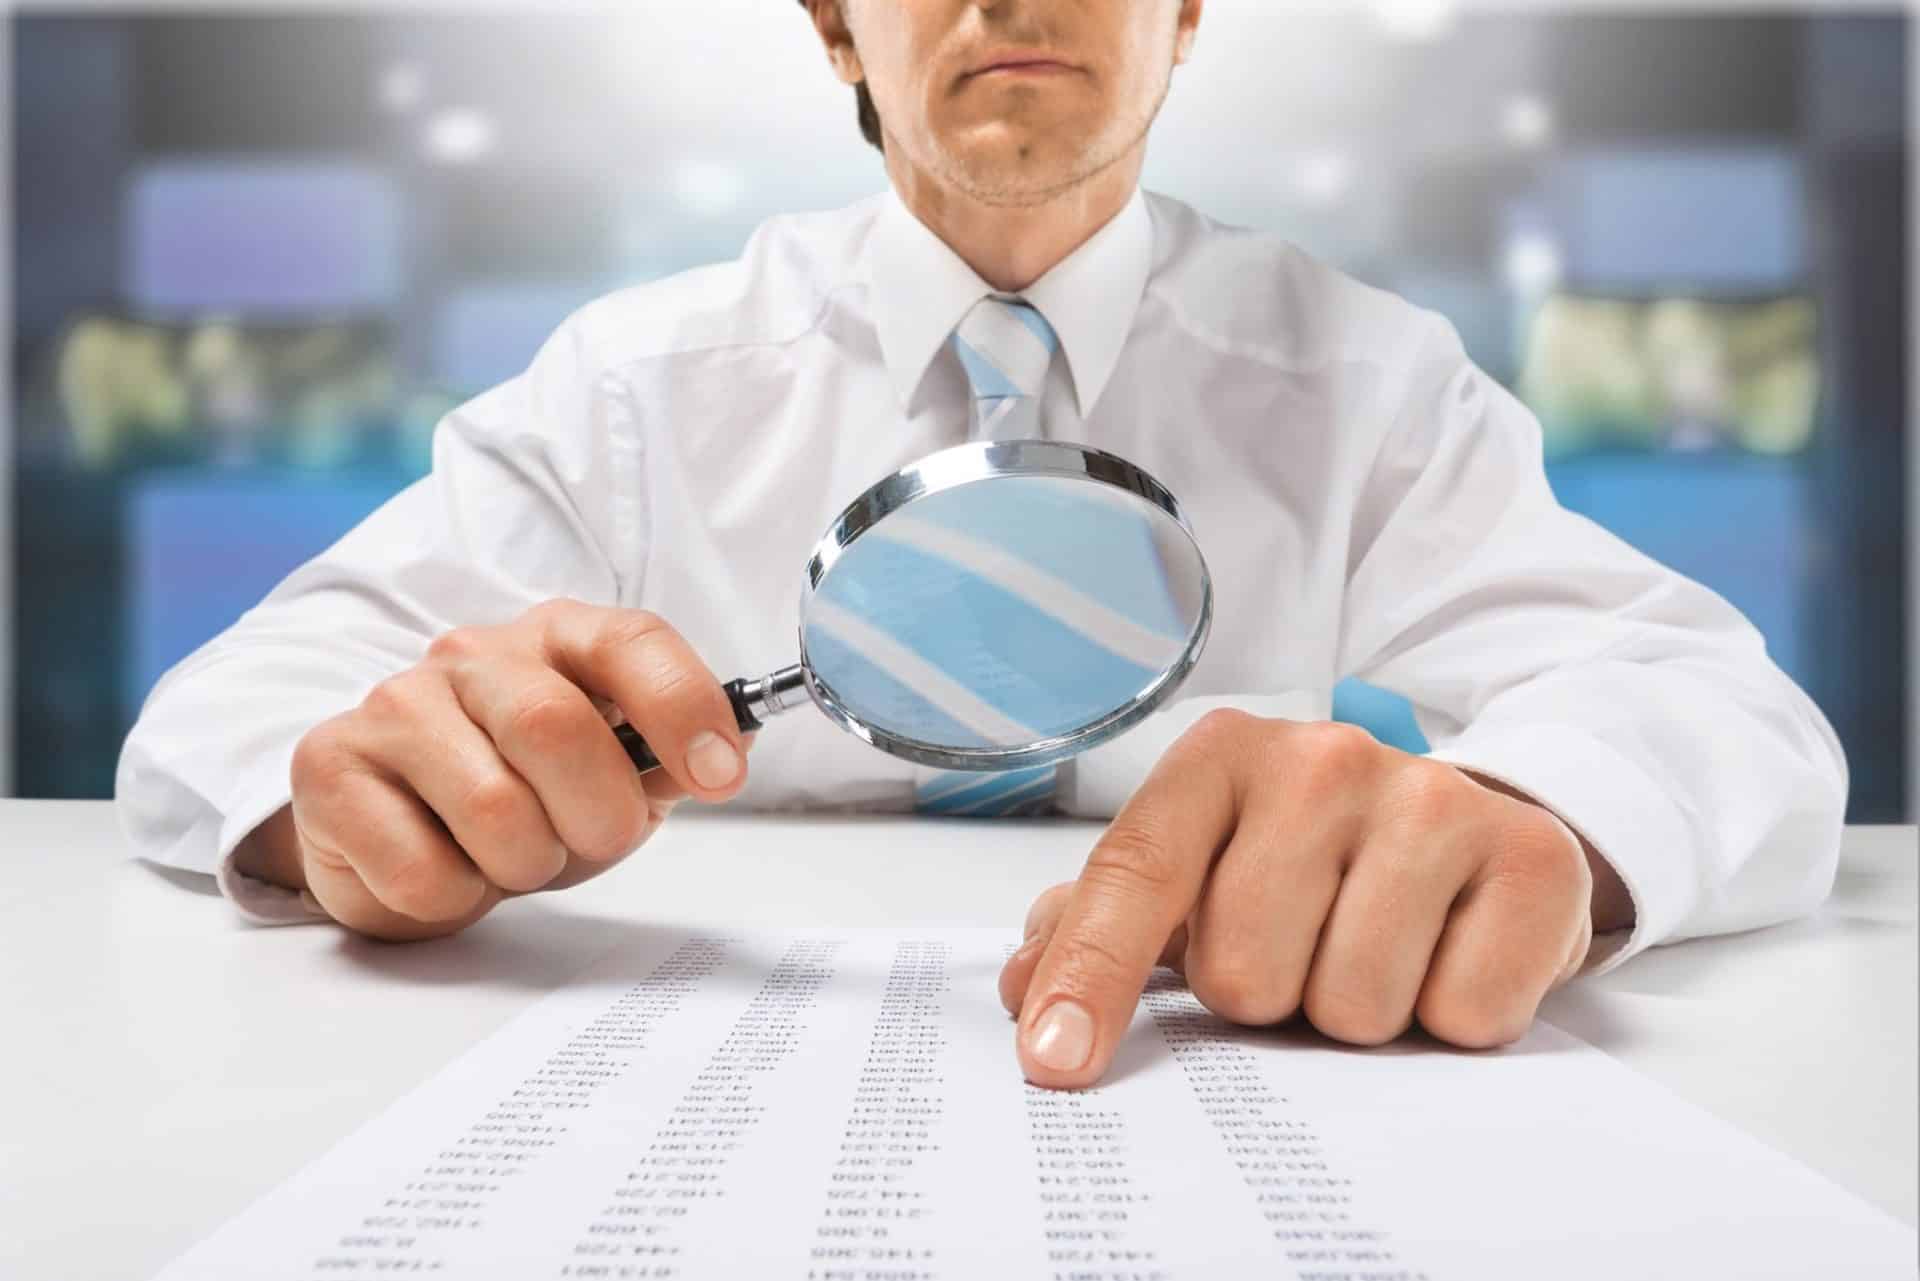 A man, caught in the grips of perfection paralysis, intently examines a document through a magnifying glass.